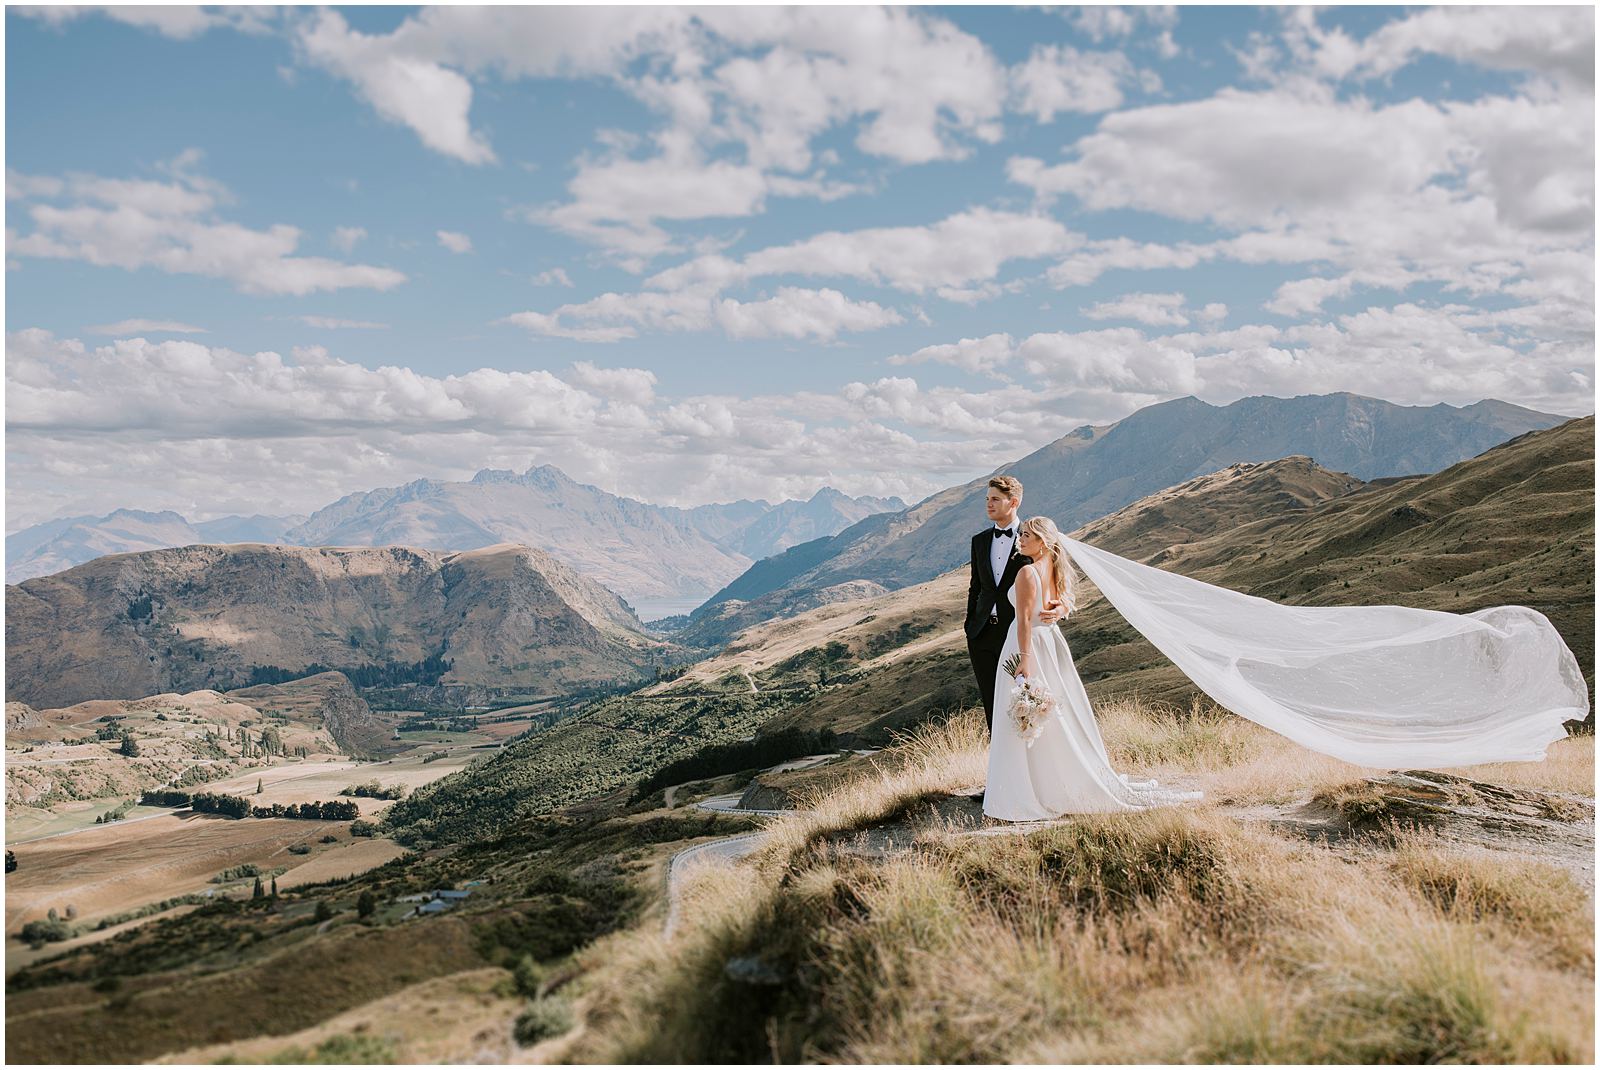 Charlotte Kiri Photography - Wedding Photography of a bride and groom looking wistfully at the beautiful mountainous scenery and landscape around them in Wanaka, New Zealand.